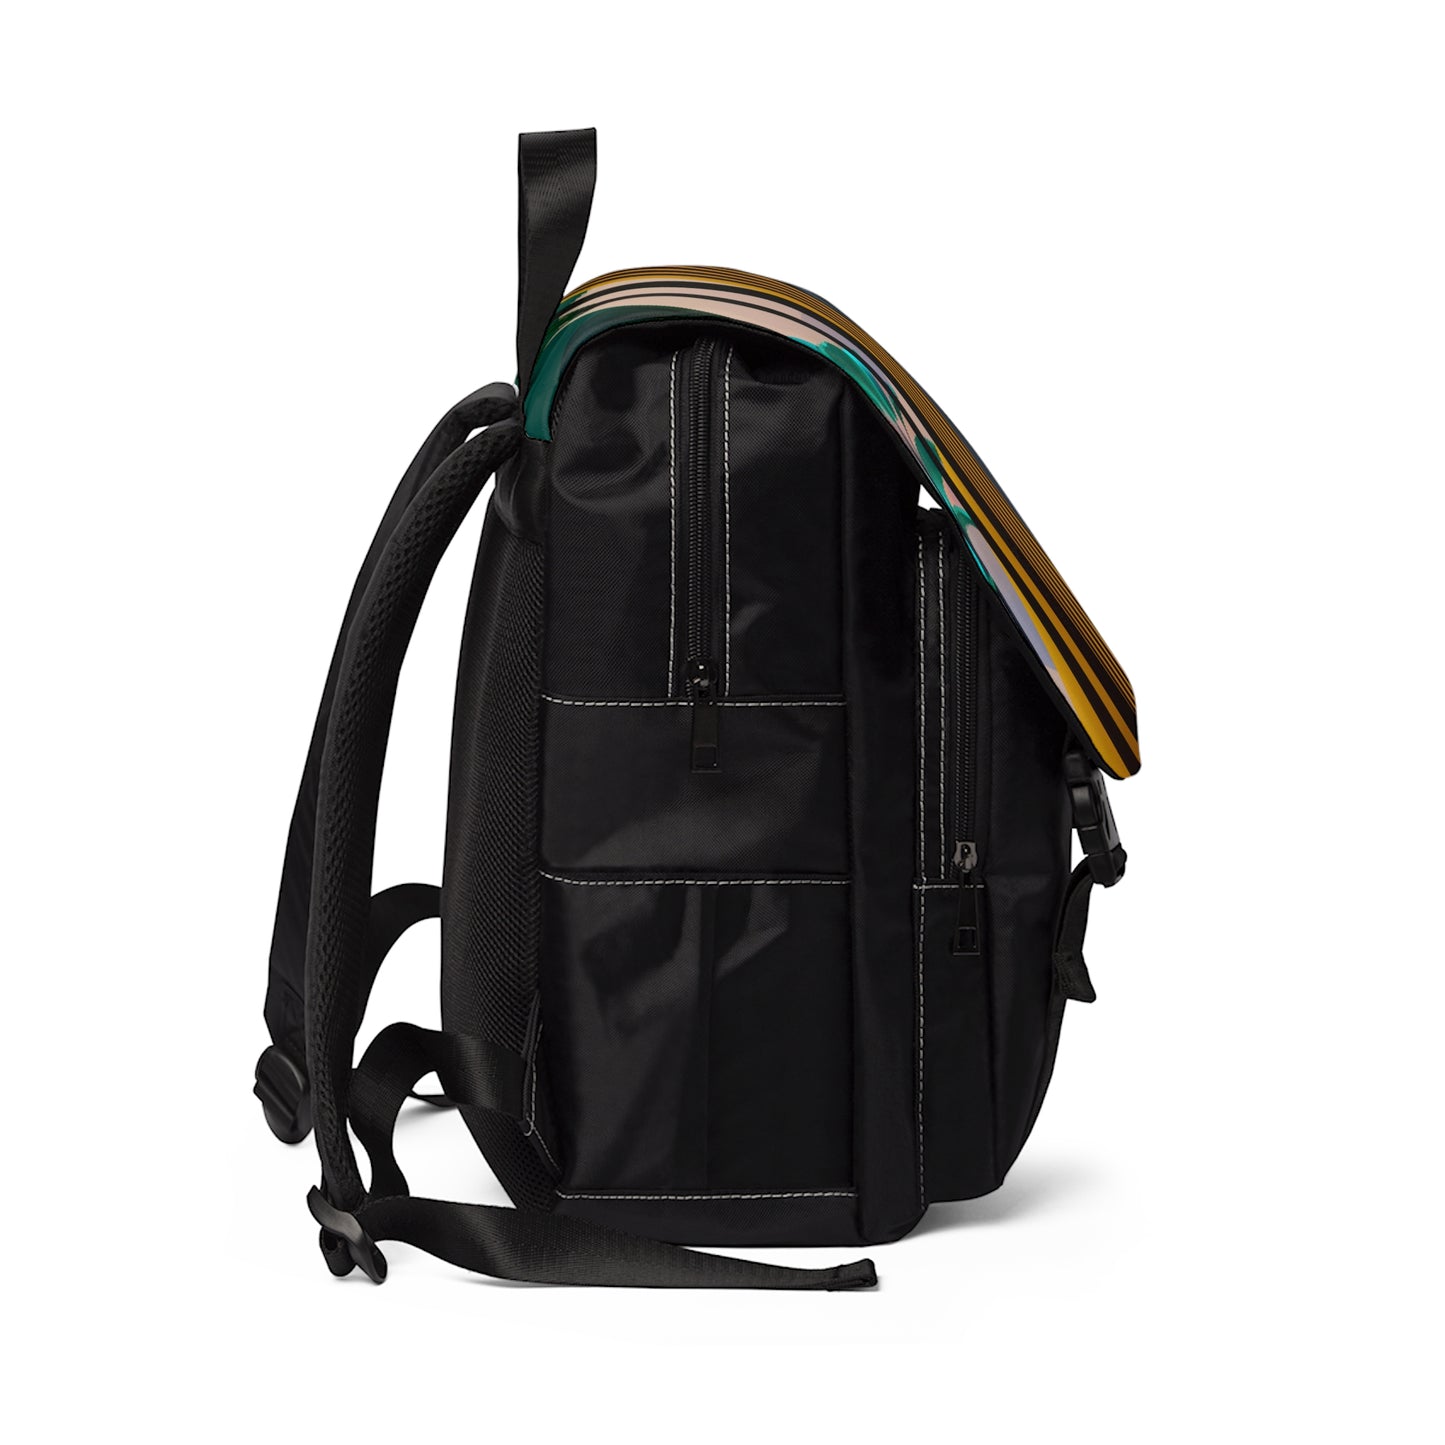 TROPICAL FUTURE 101 - Unisex Casual Shoulder Backpack